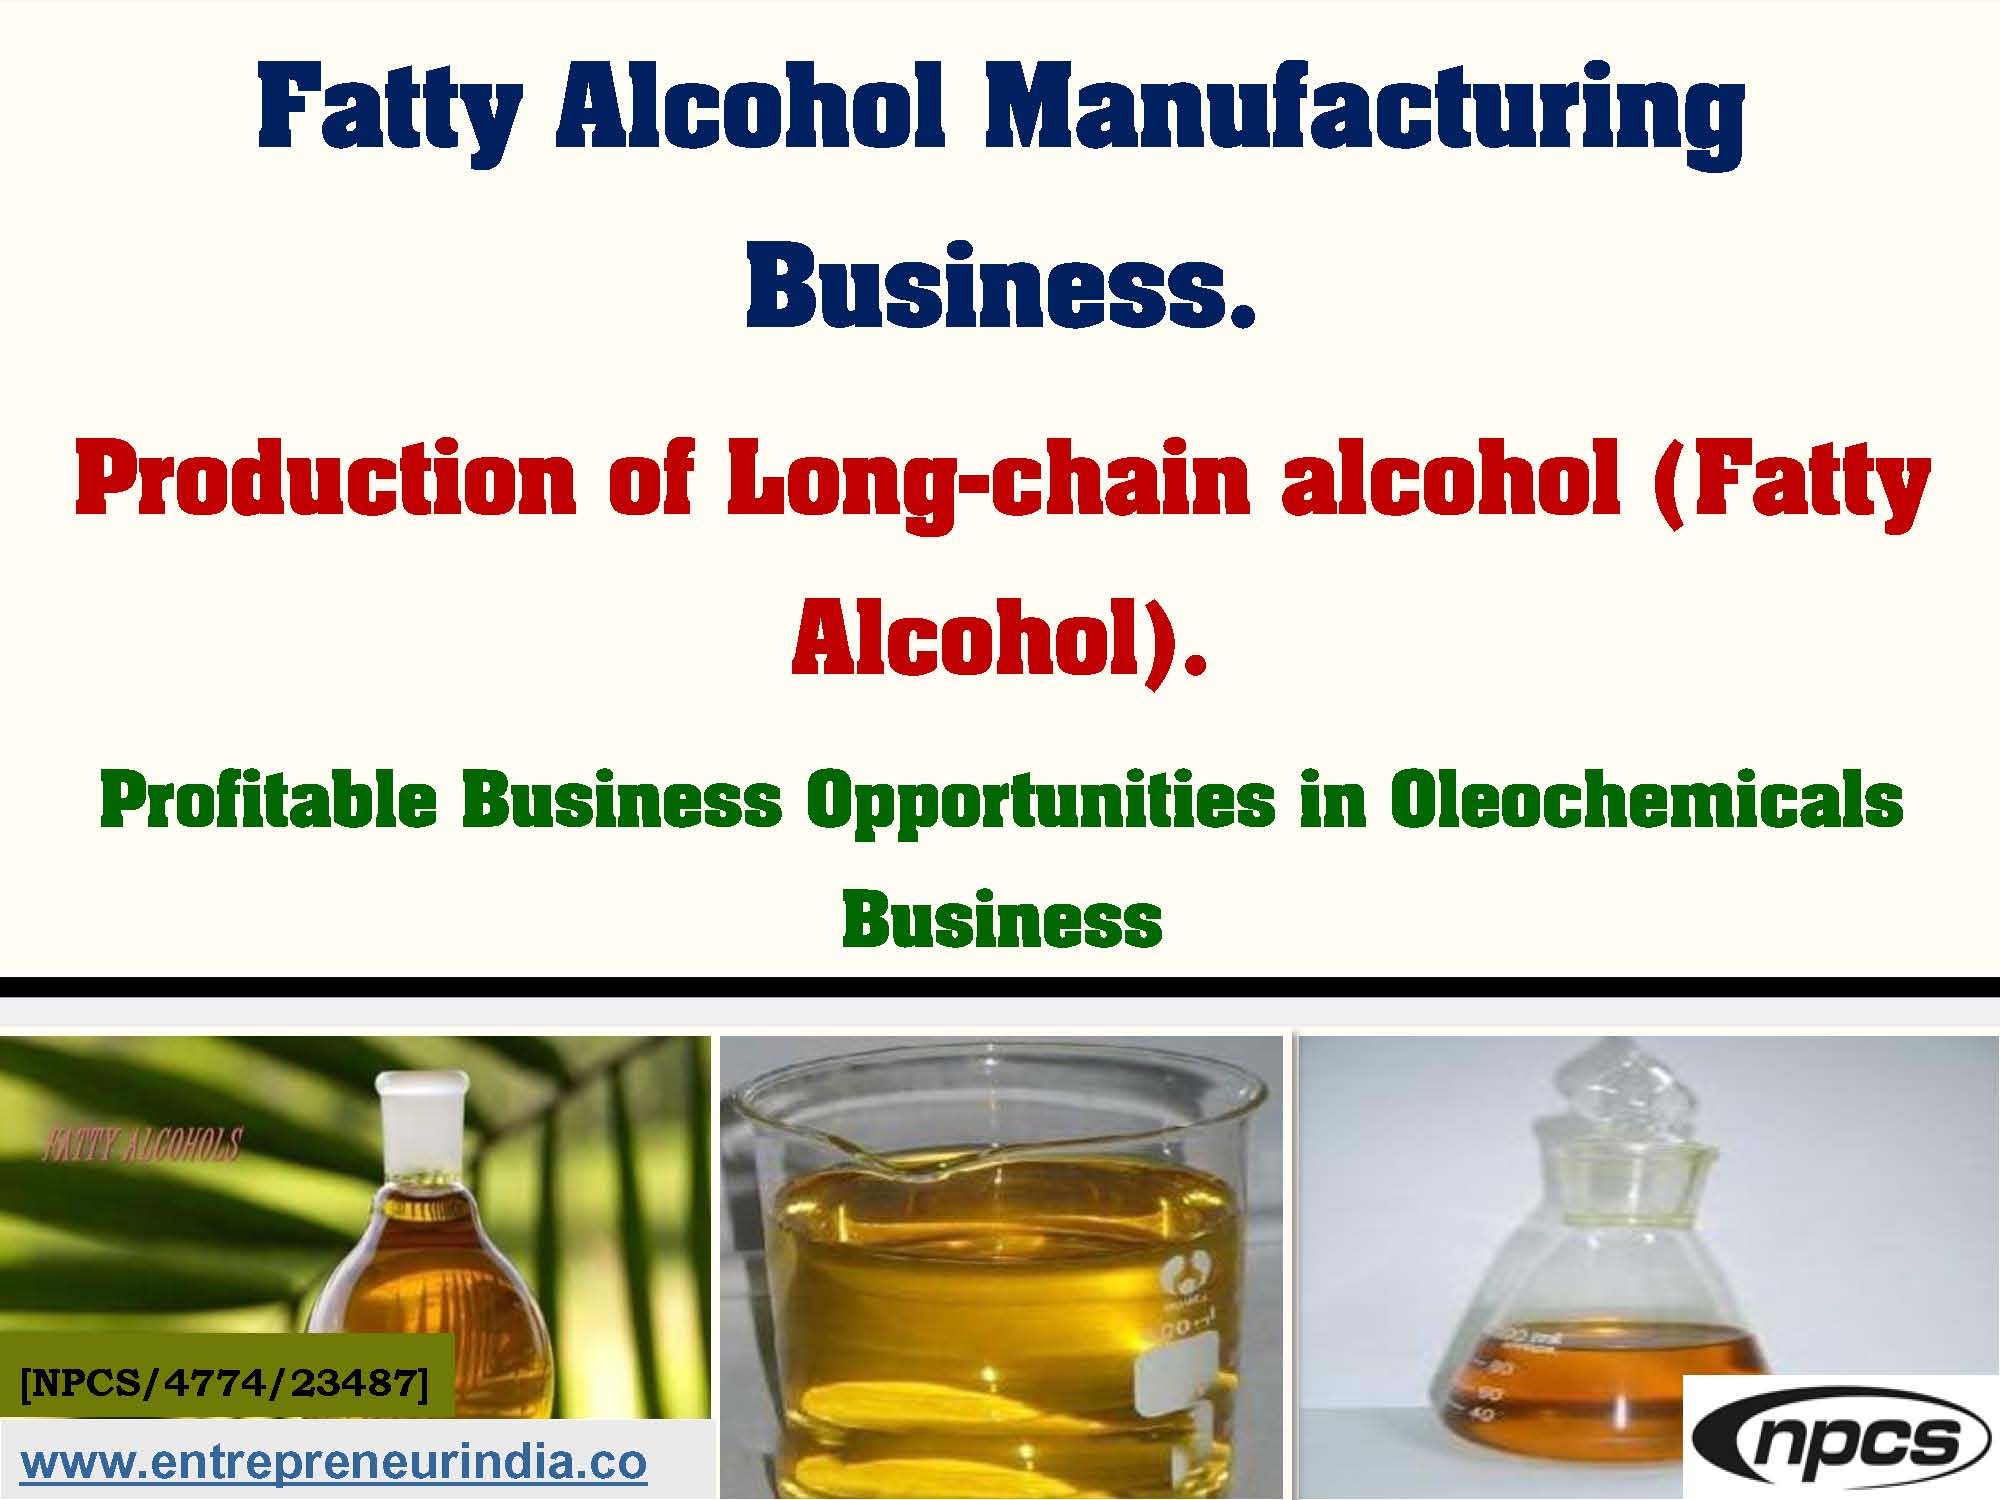 Fatty Alcohol Manufacturing Business